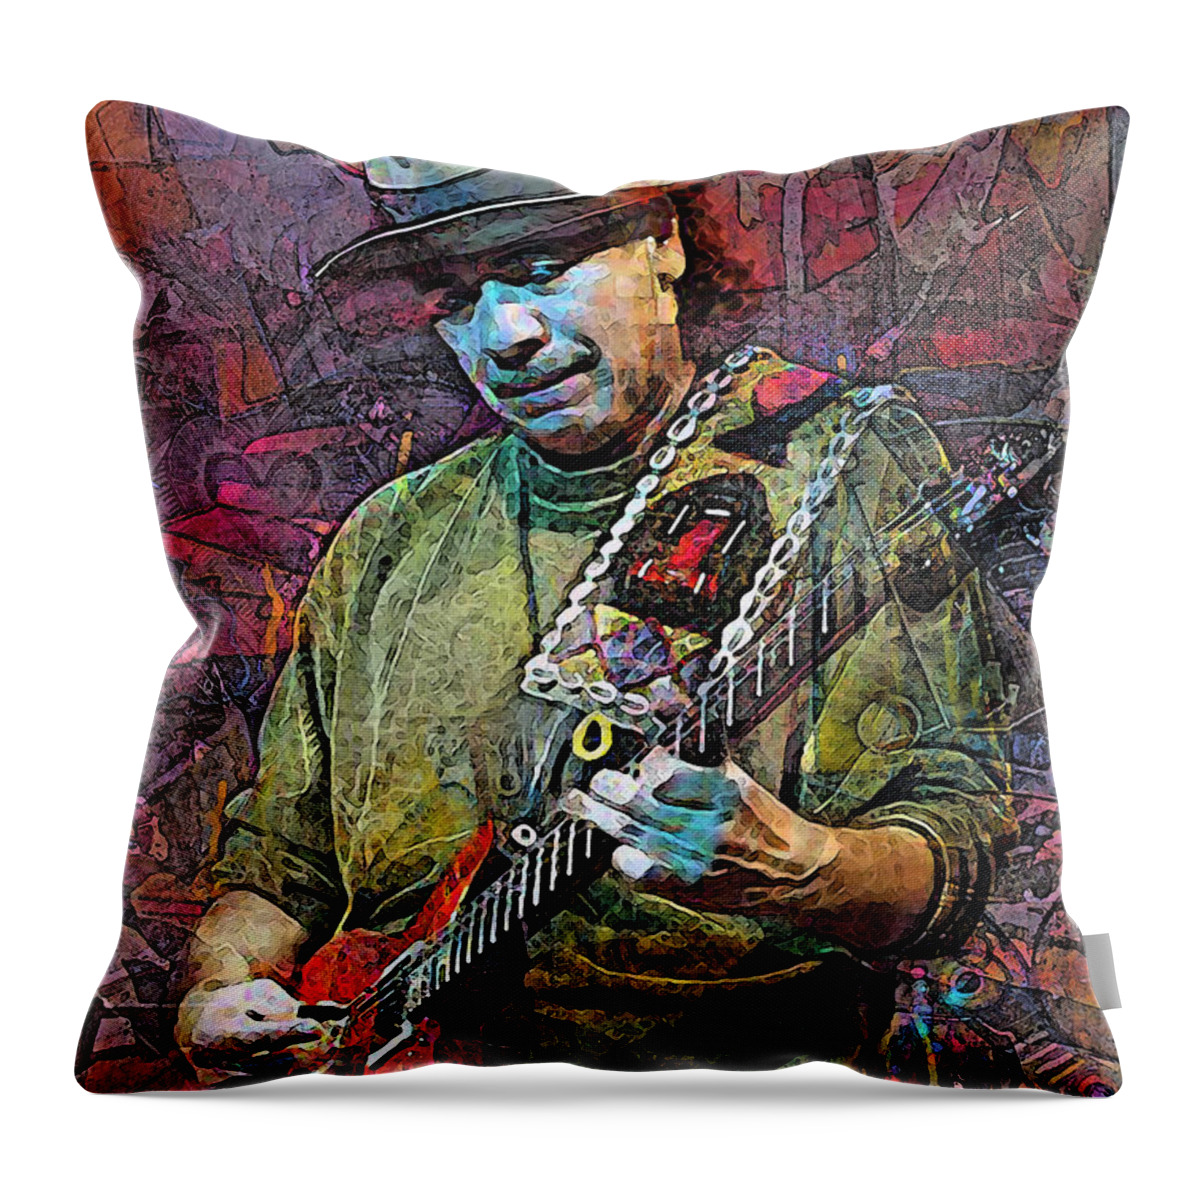 Carlos Santana Throw Pillow featuring the mixed media Live Your Light by Mal Bray